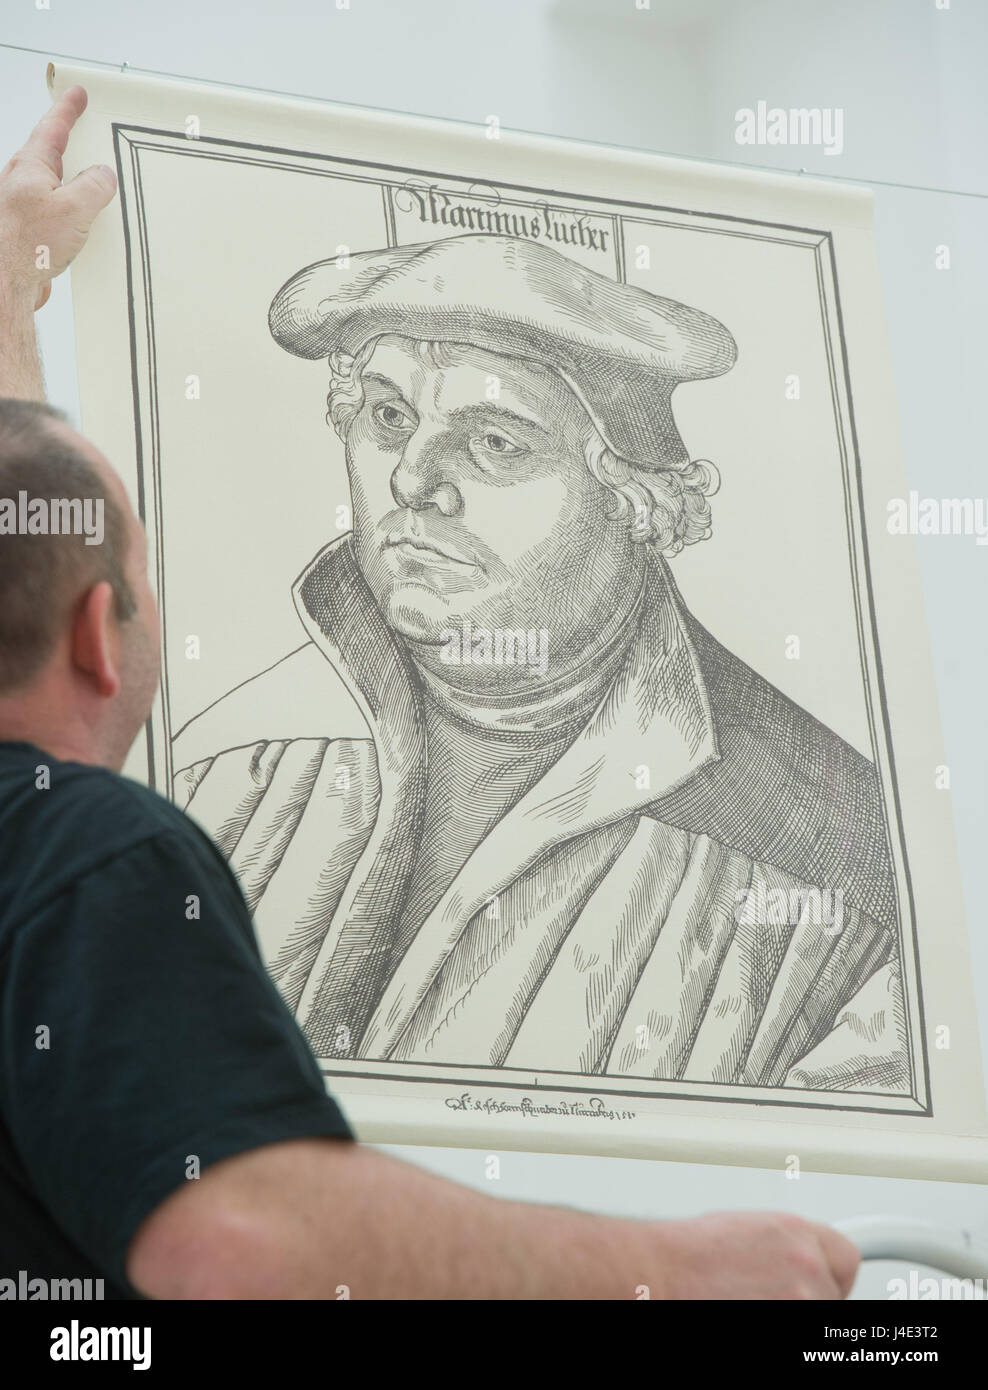 A portrait of Martin Luther can be seen at the Pommeranian state museum in Greifswald, Germany, 10 May 2017. The special exhibition "Luthers Norden" (lit. "Luther's north") is a joint project of museums in Mecklenburg-Western Pomerania and Schleswig-Holstein to commemorate the reformation in Northern Germany 500 years ago. The exhibition shows 92 exhibits, amongst them 8 portraits of the Cranach workshop, as well as the unfinished painting "Petrus auf dem Meer" from the Hamburg Art Hall. The exhibition can be seen from the 14 May to the 3 September 2017. It wil move to Palace Gottorf in autumn Stock Photo